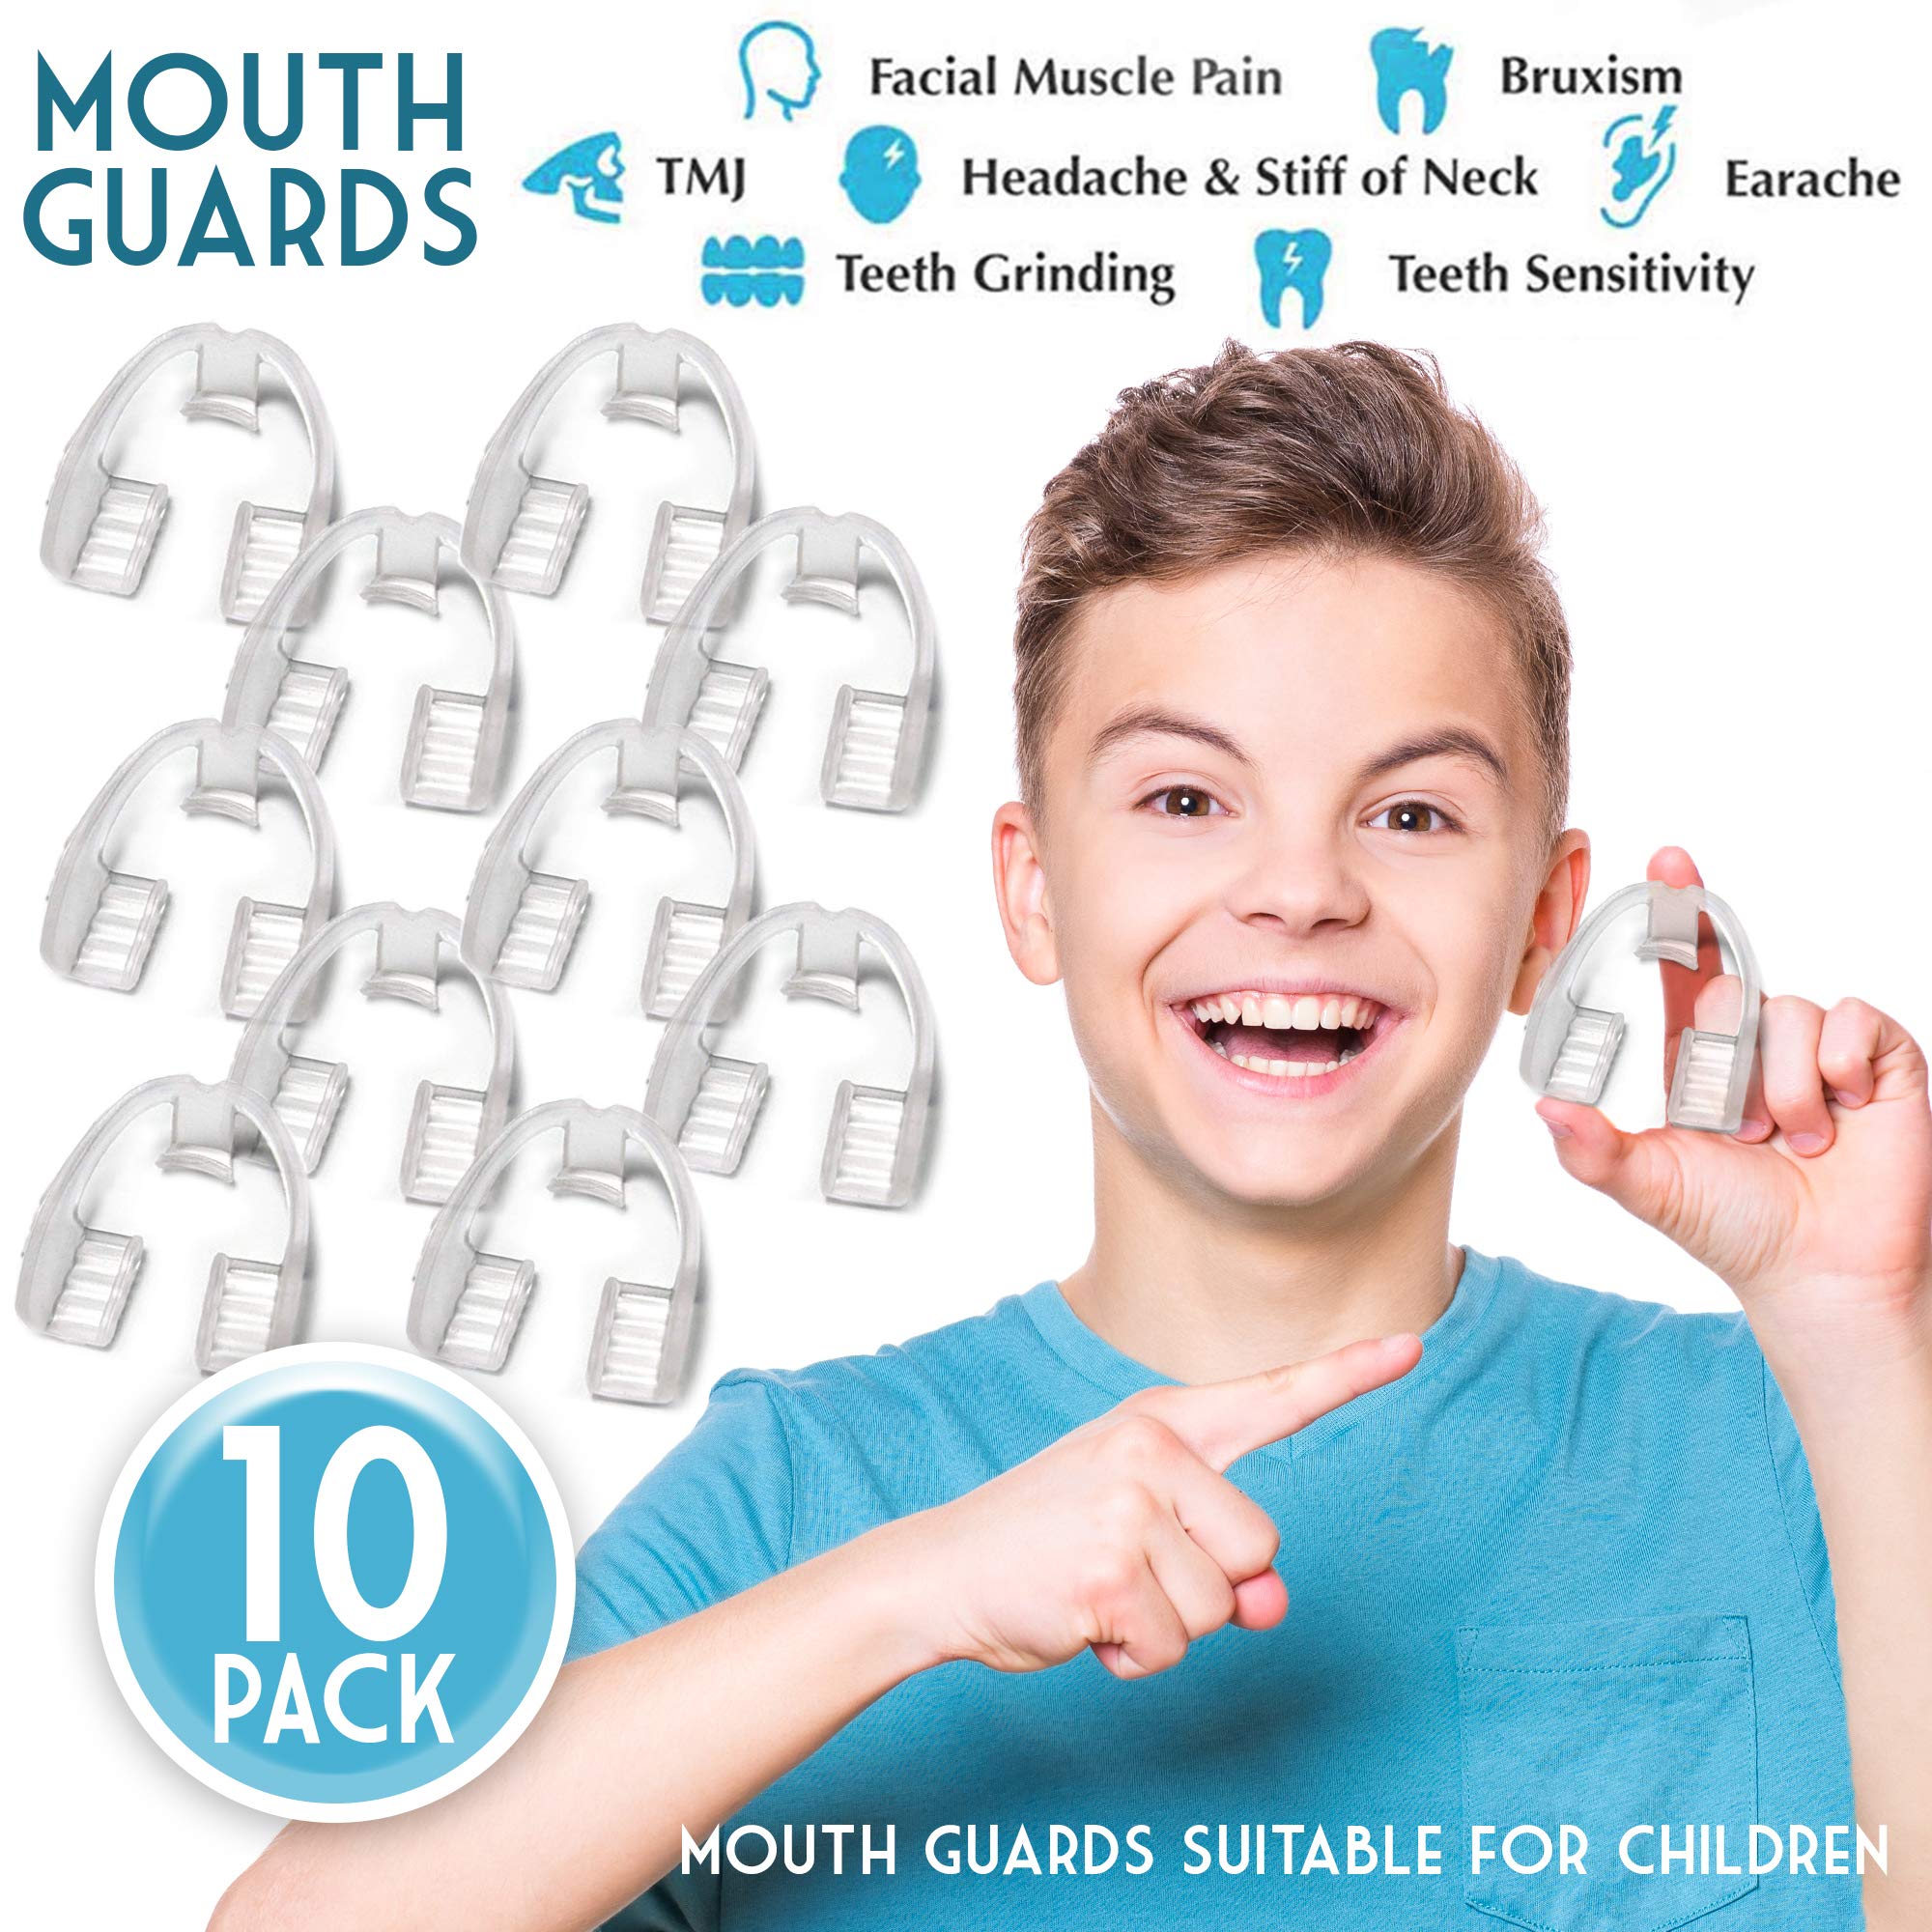 Alayna Kids Mouth Guard for Grinding Teeth - 10 PK Night Guard for TMJ Bruxism Teeth Clenching, No Boiling or Molding - for Upper or Lower Jaw - Ready to Use Childrens Dental Guard for Pain Relief